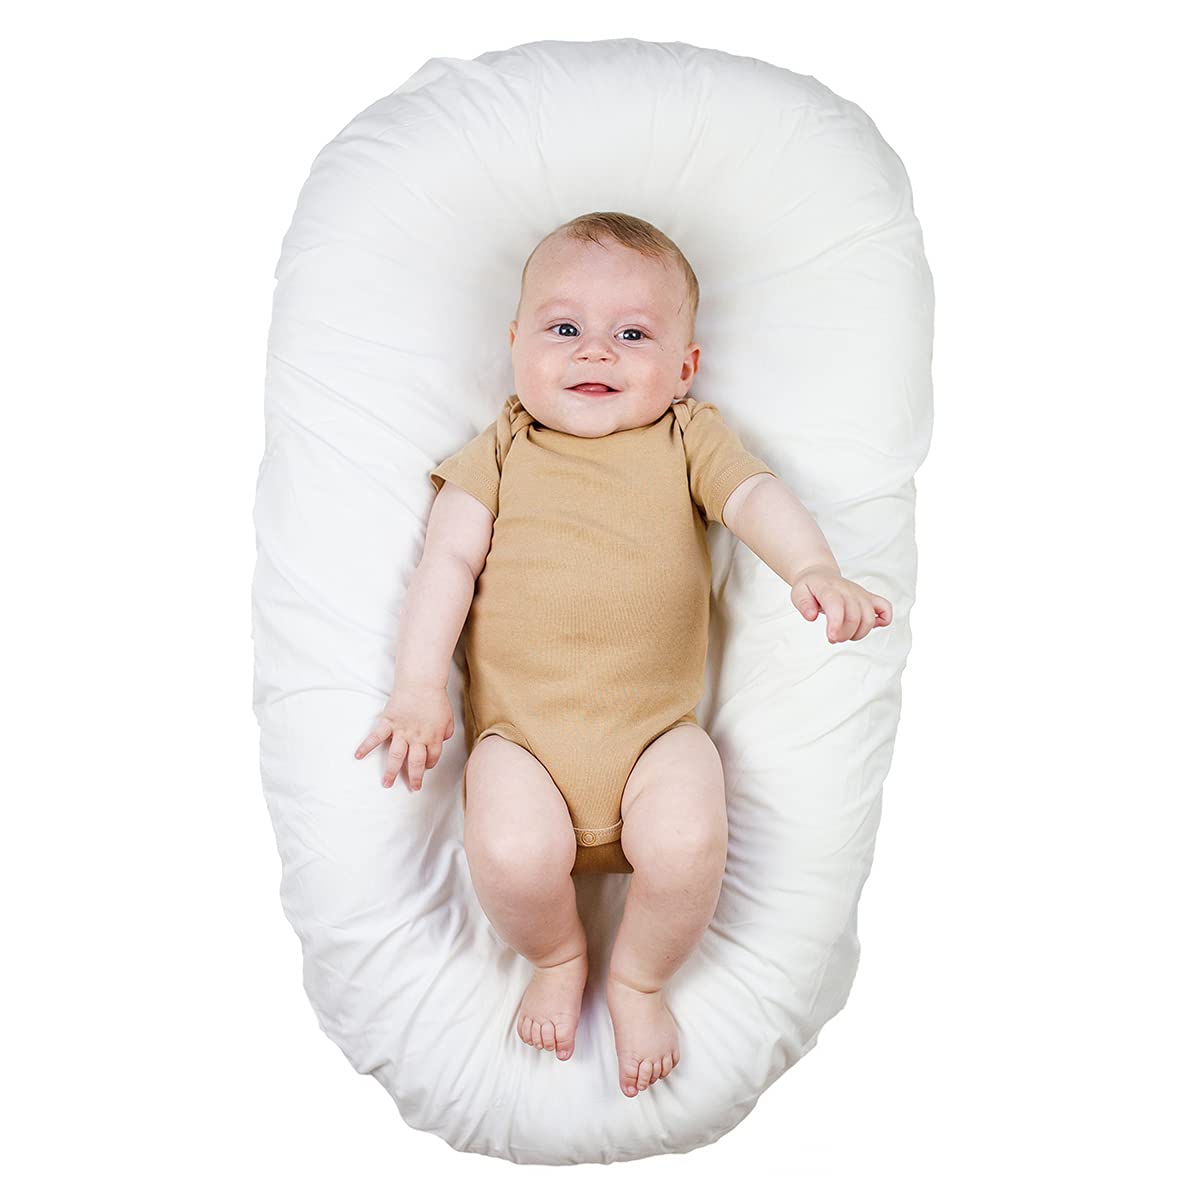 co-sleeper attaches to bed - Jojo Infant and Toddler Lounger Co-Sleeper